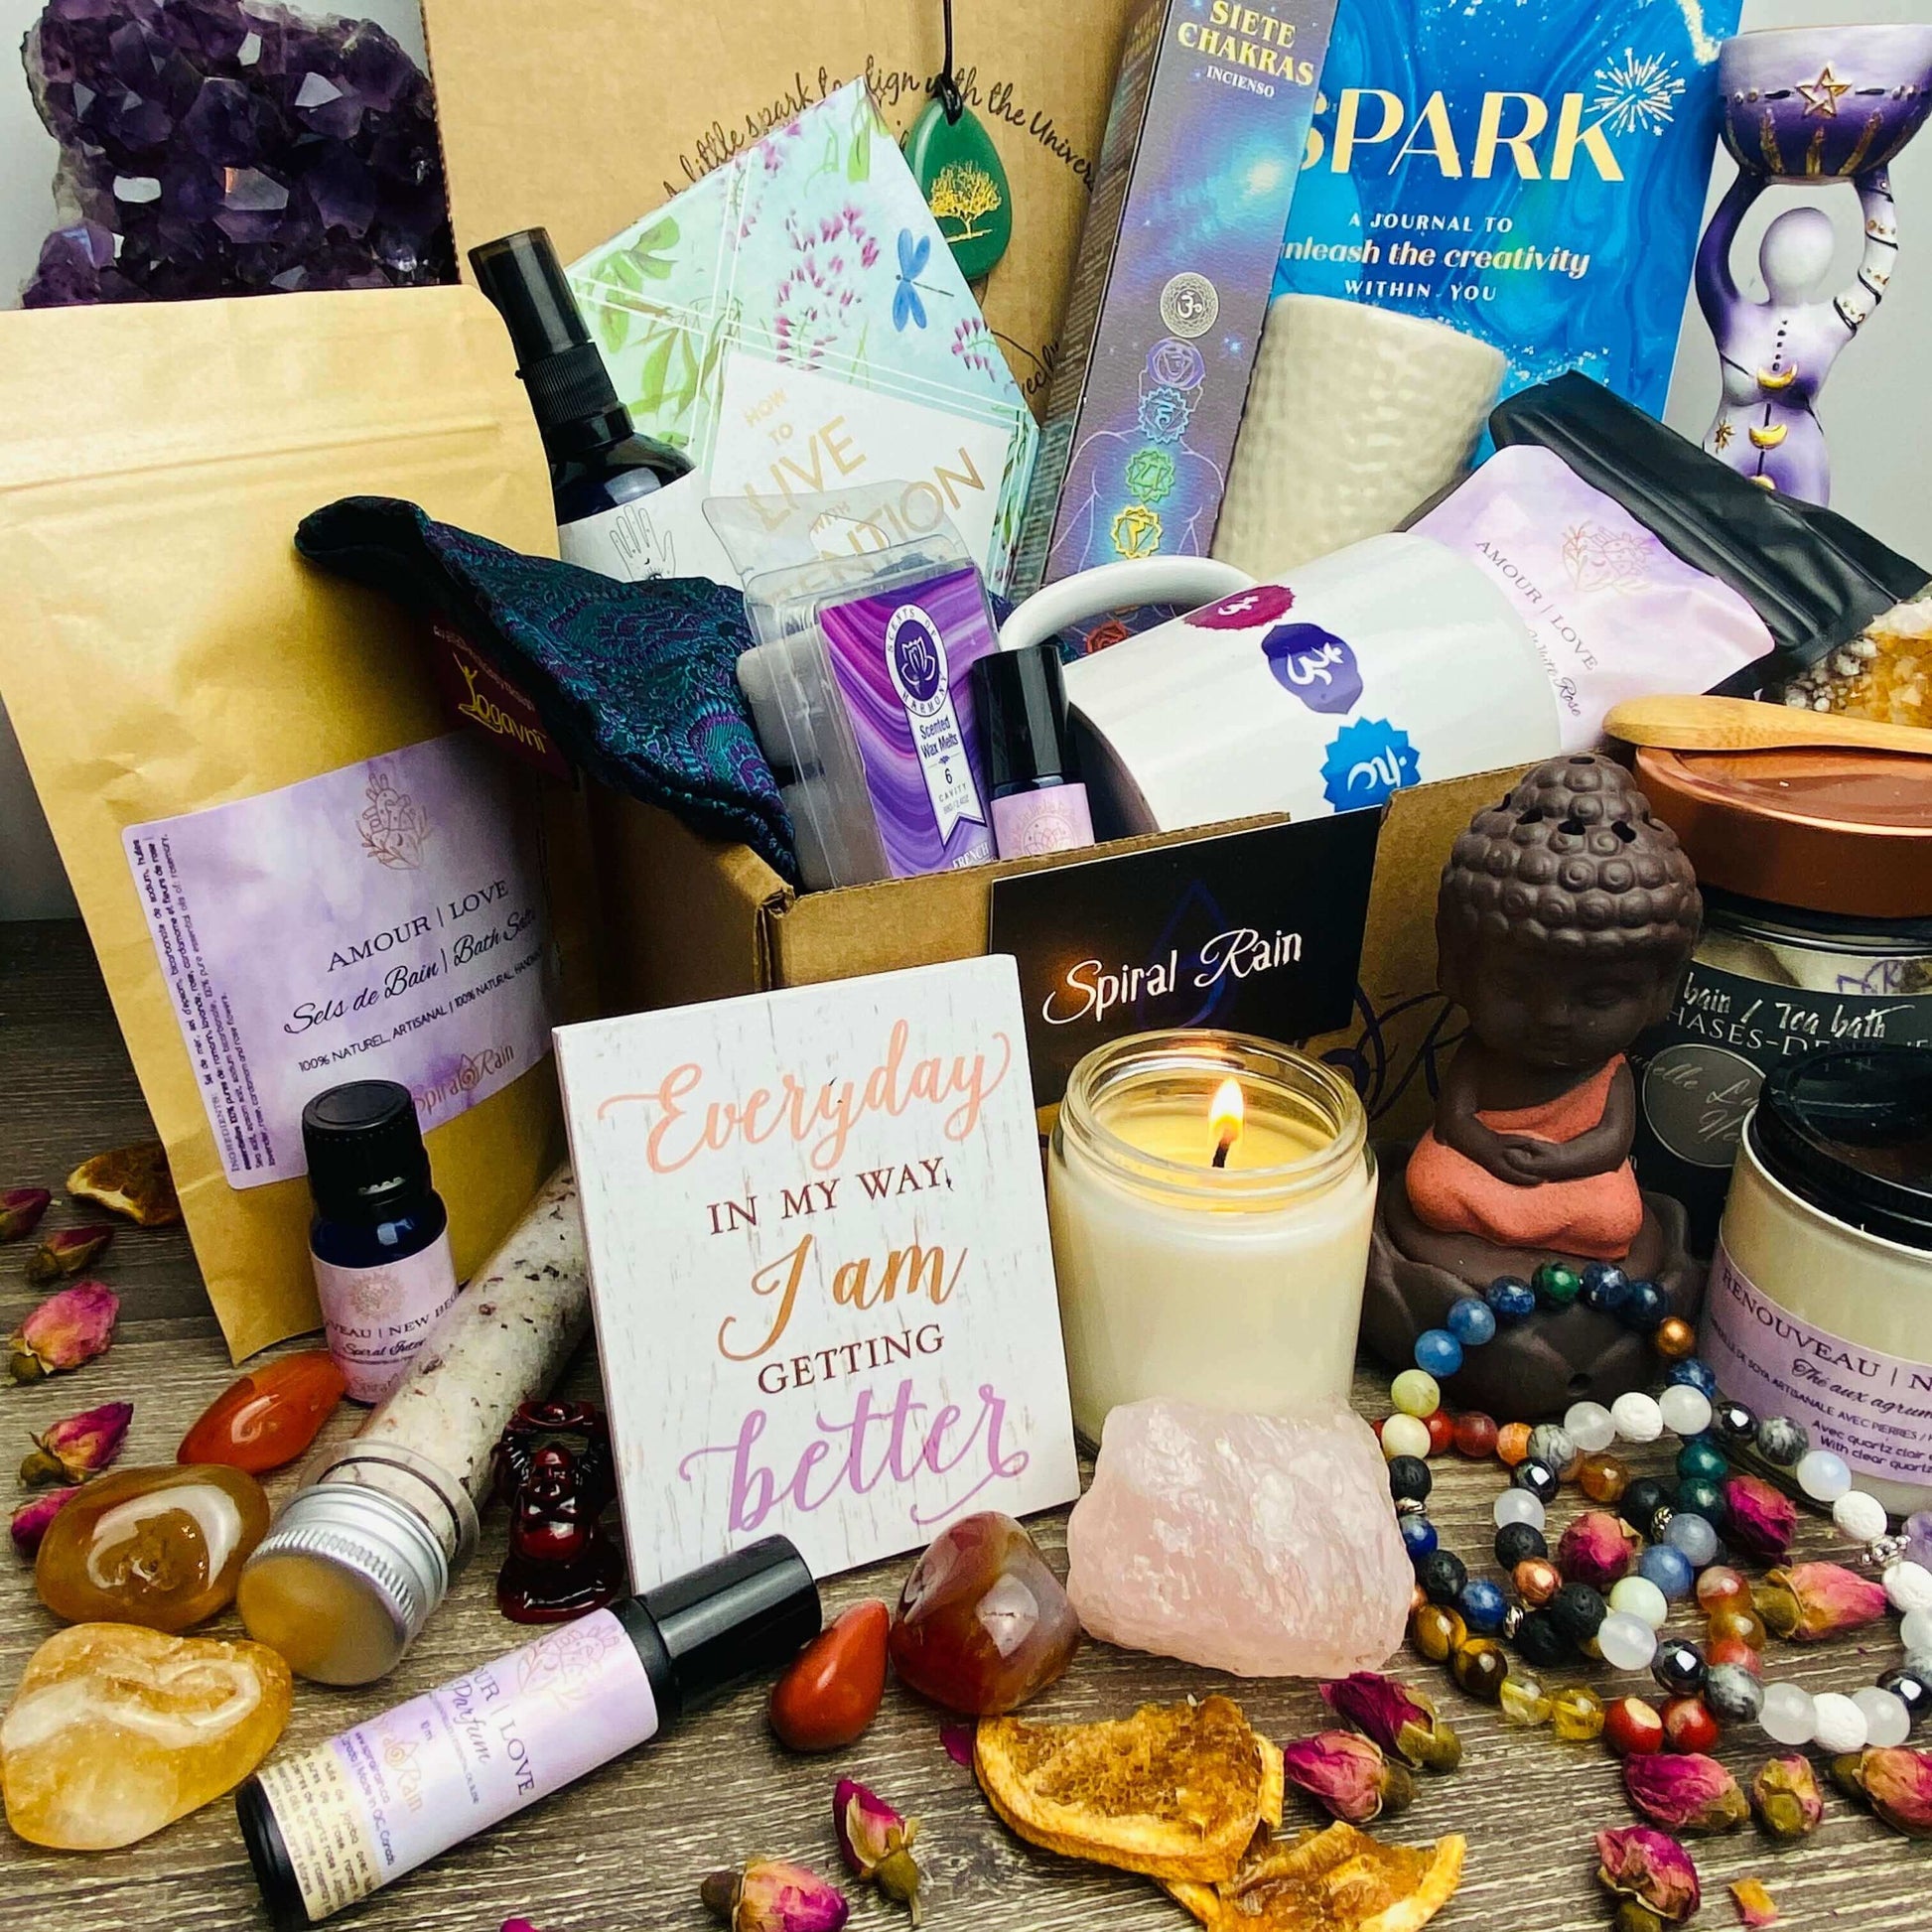 Apothecary + Ohm + Witch Box combo at $128.99 only from Spiral Rain